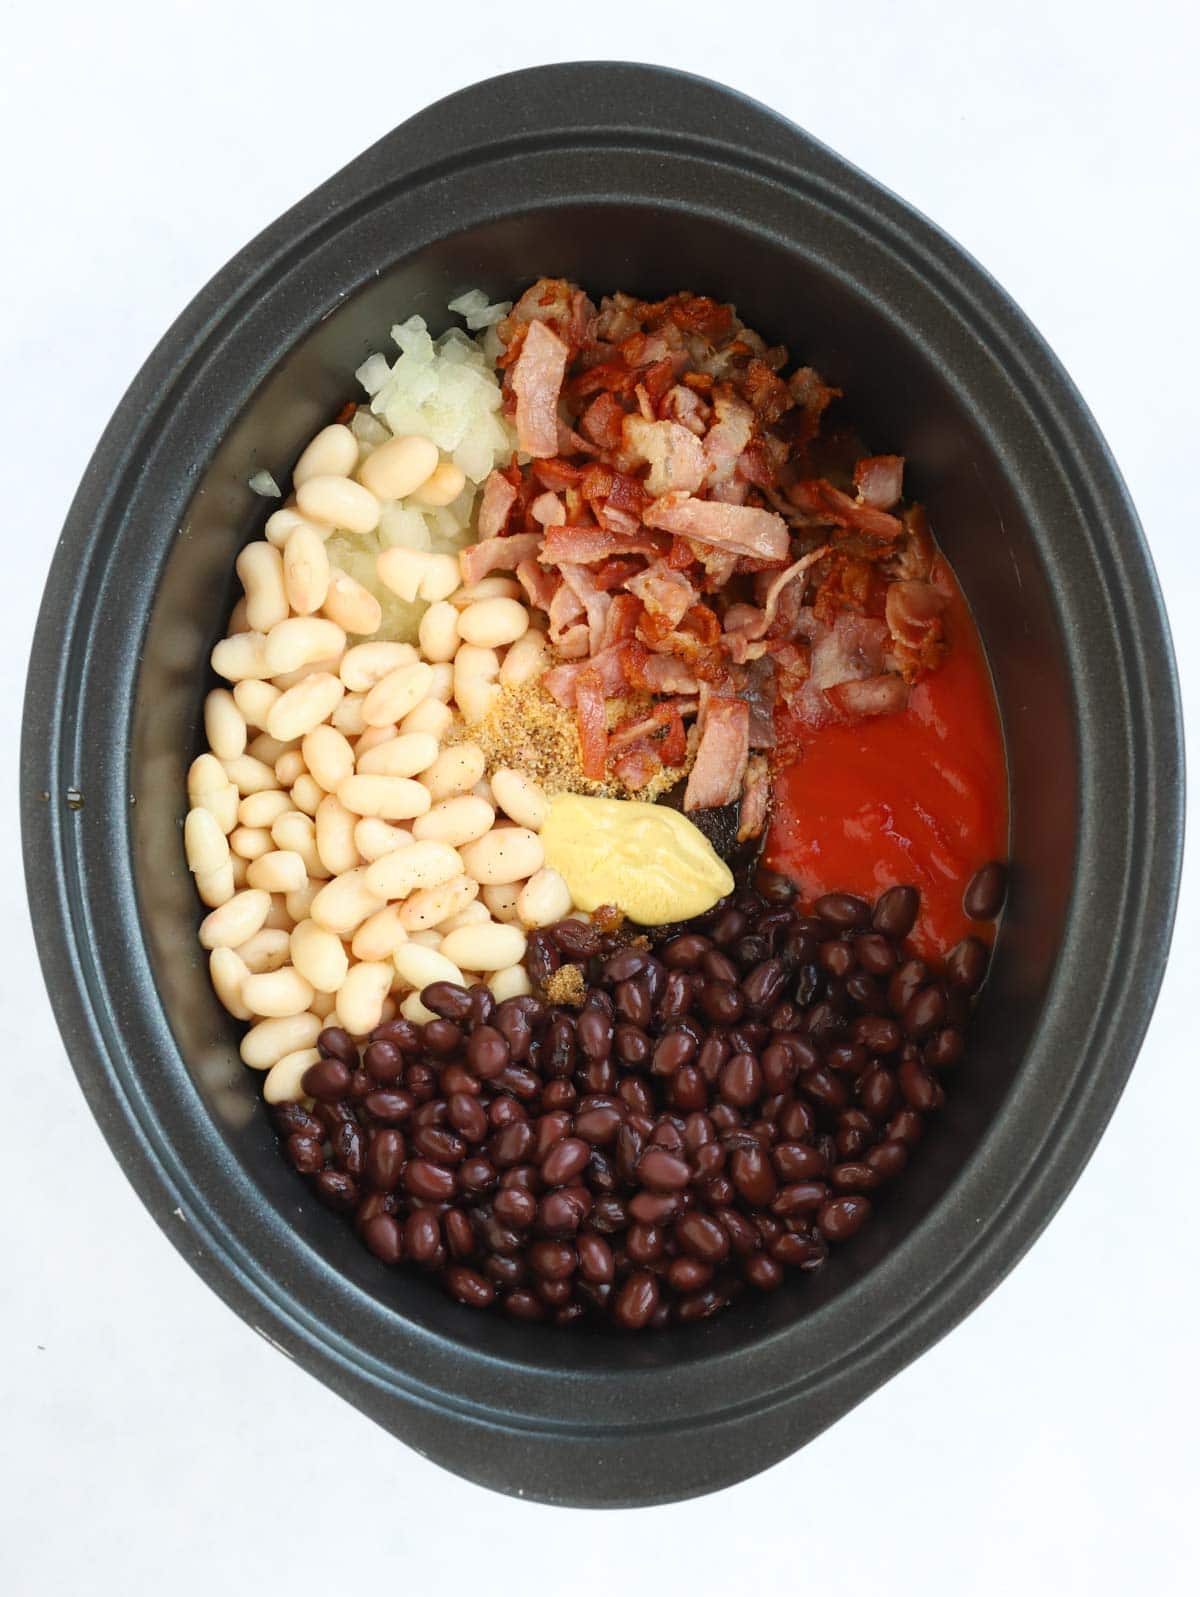 Raw ingredients for homemade baked beans cooked in the slow cooker